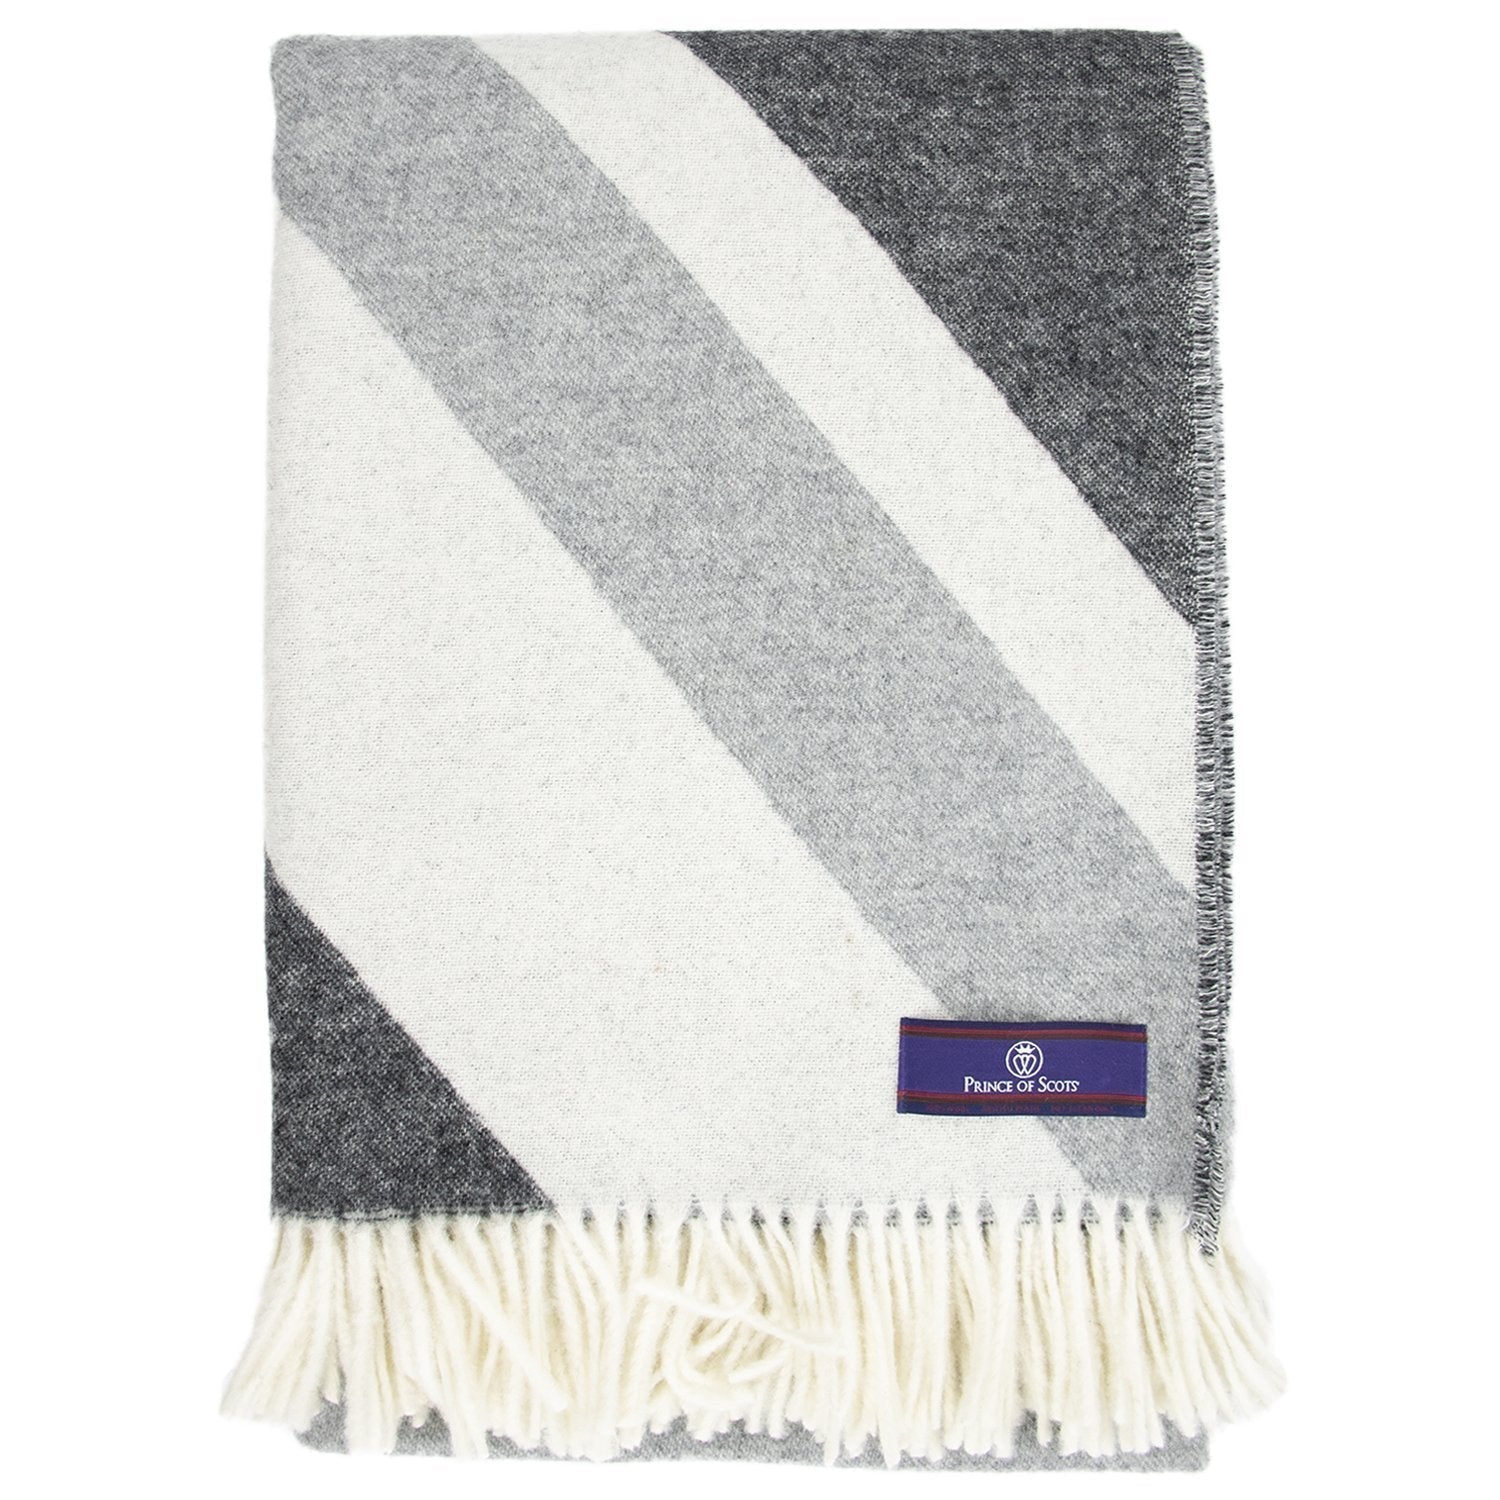 Prince of Scots Monochromatic Union Jack Merino Wool Throw-Throws and Blankets-Prince of Scots-Prince of Scots